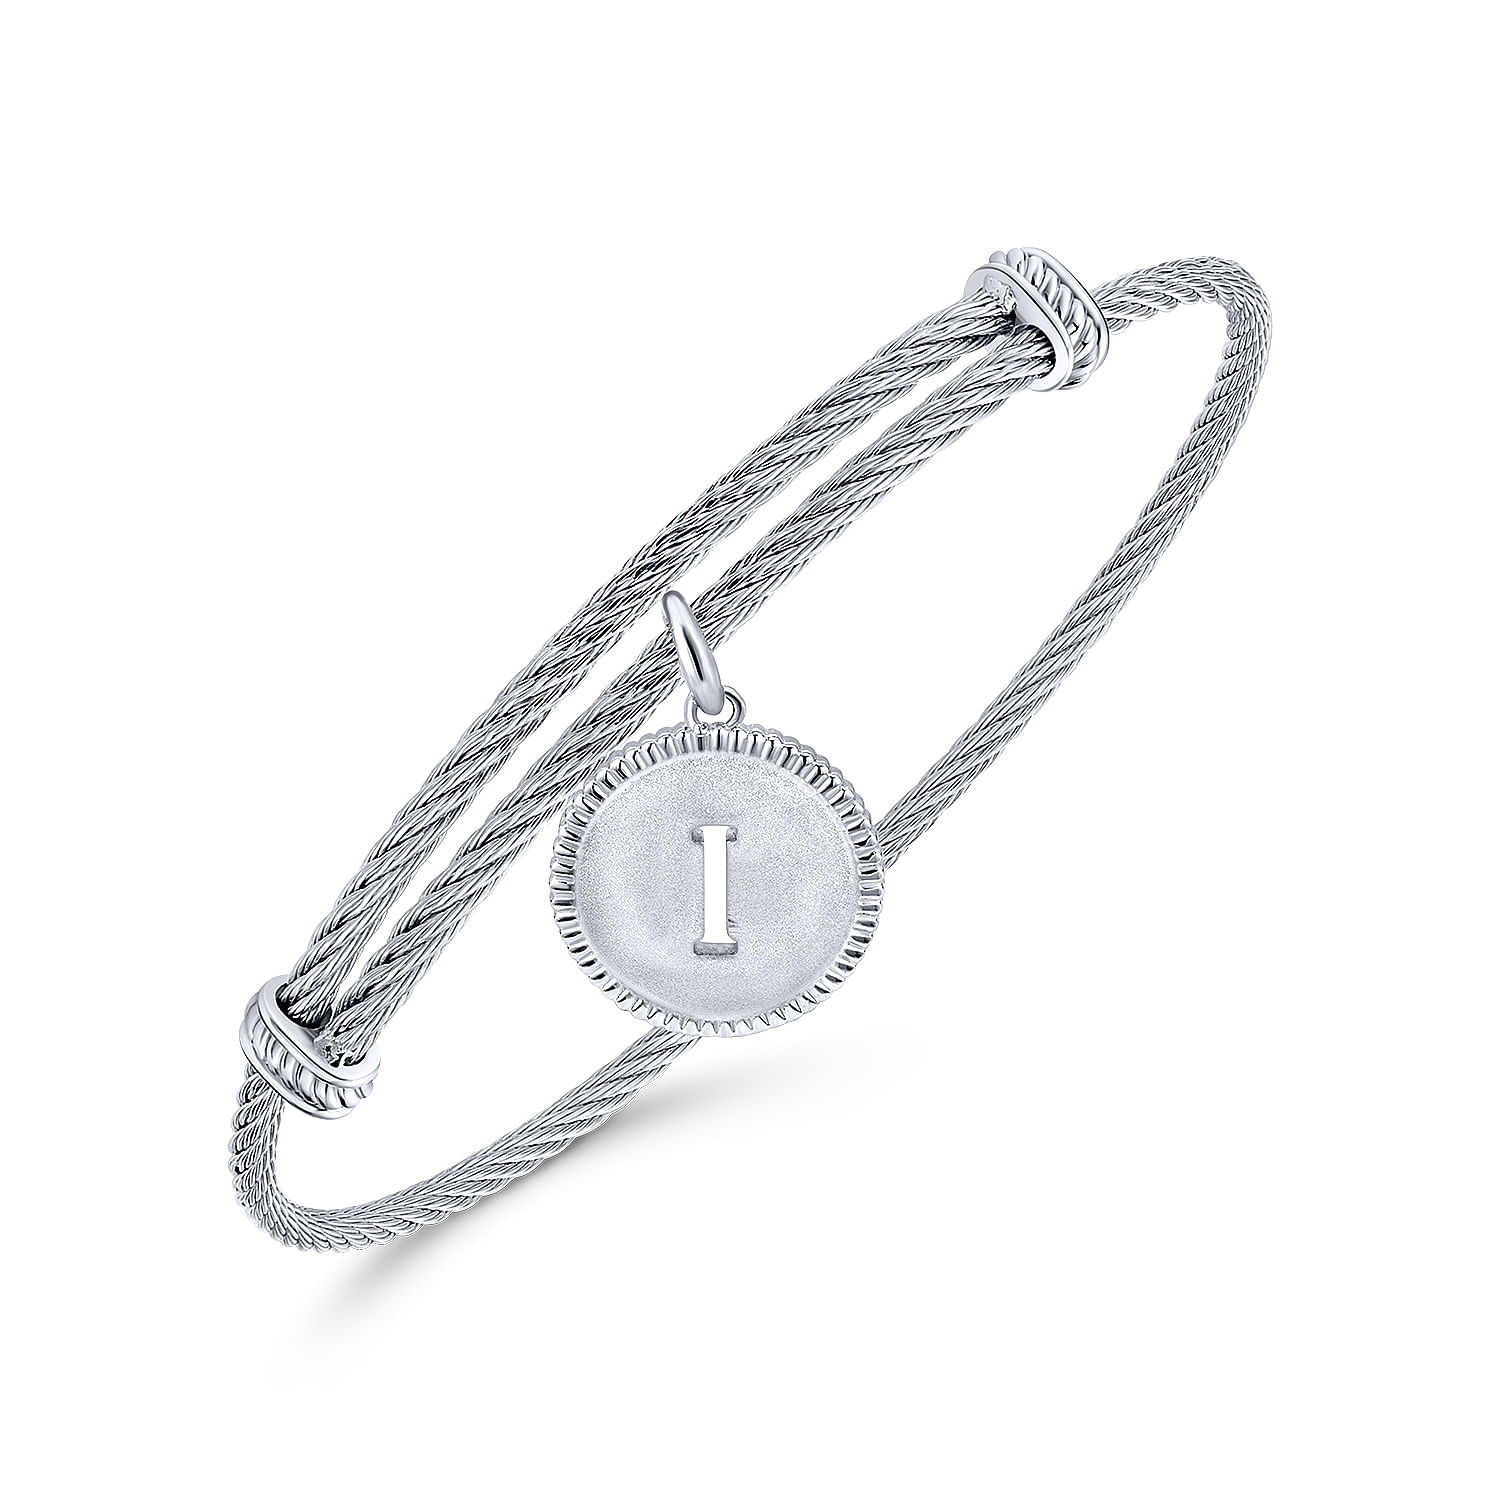 Adjustable Twisted Cable Stainless Steel Bangle with Sterling Silver I Initial Charm